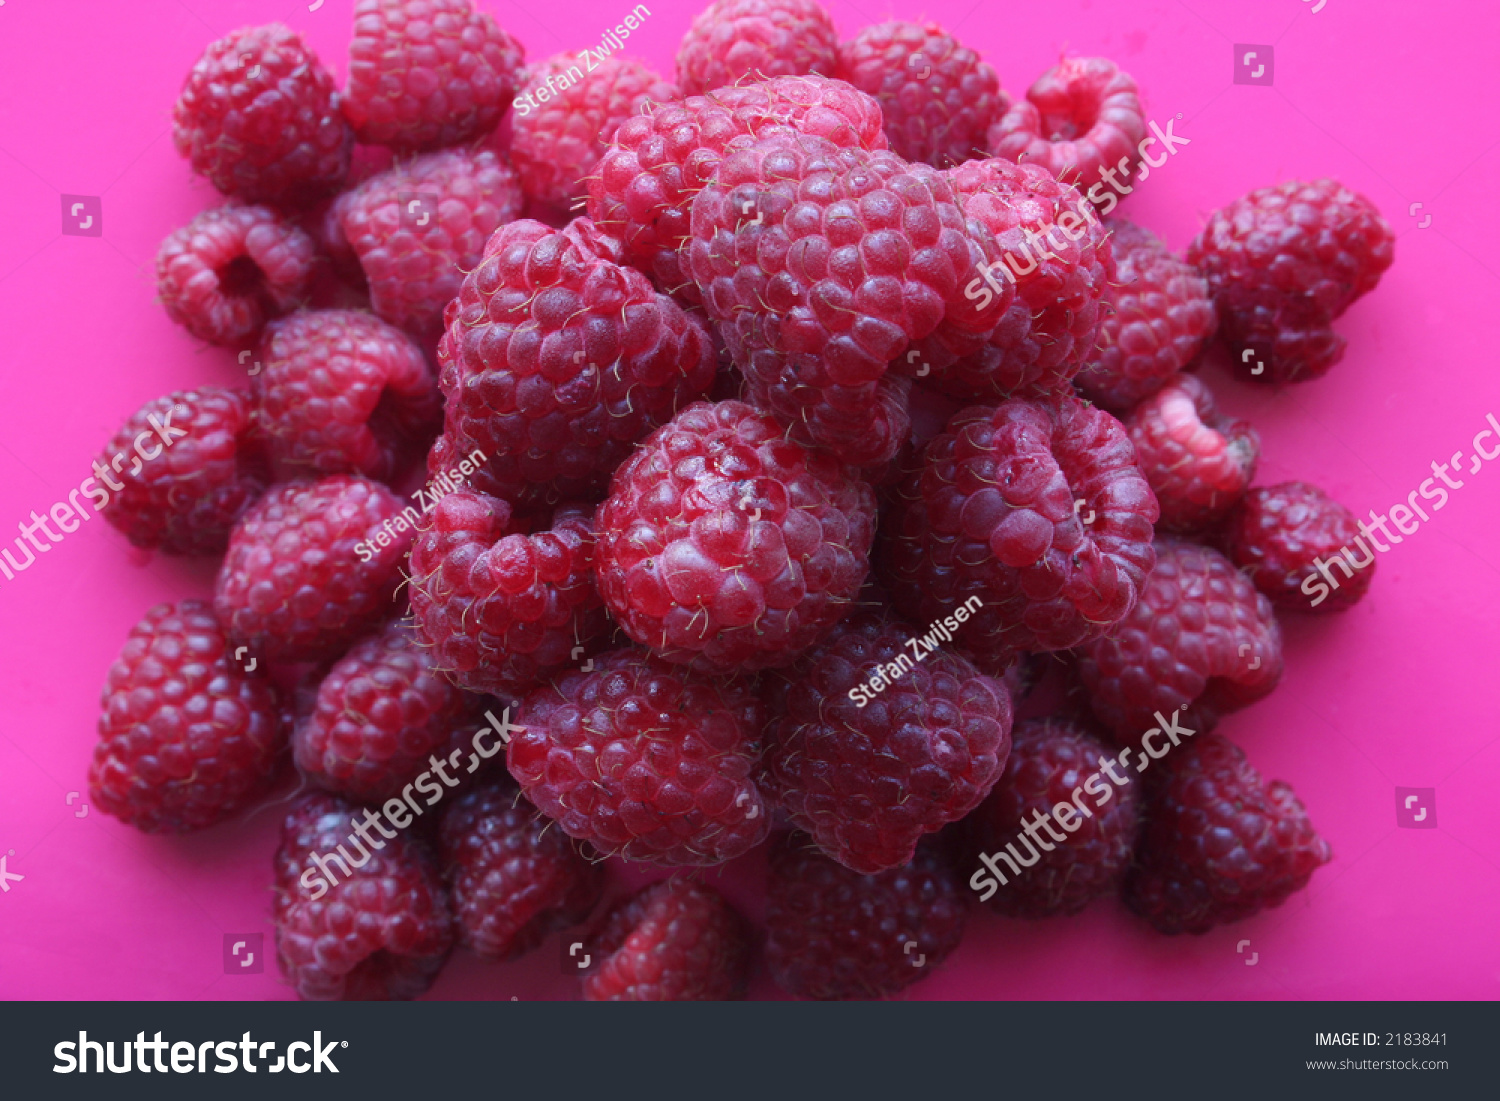 Top view of a pile of raspberries, on a pink background. #2183841